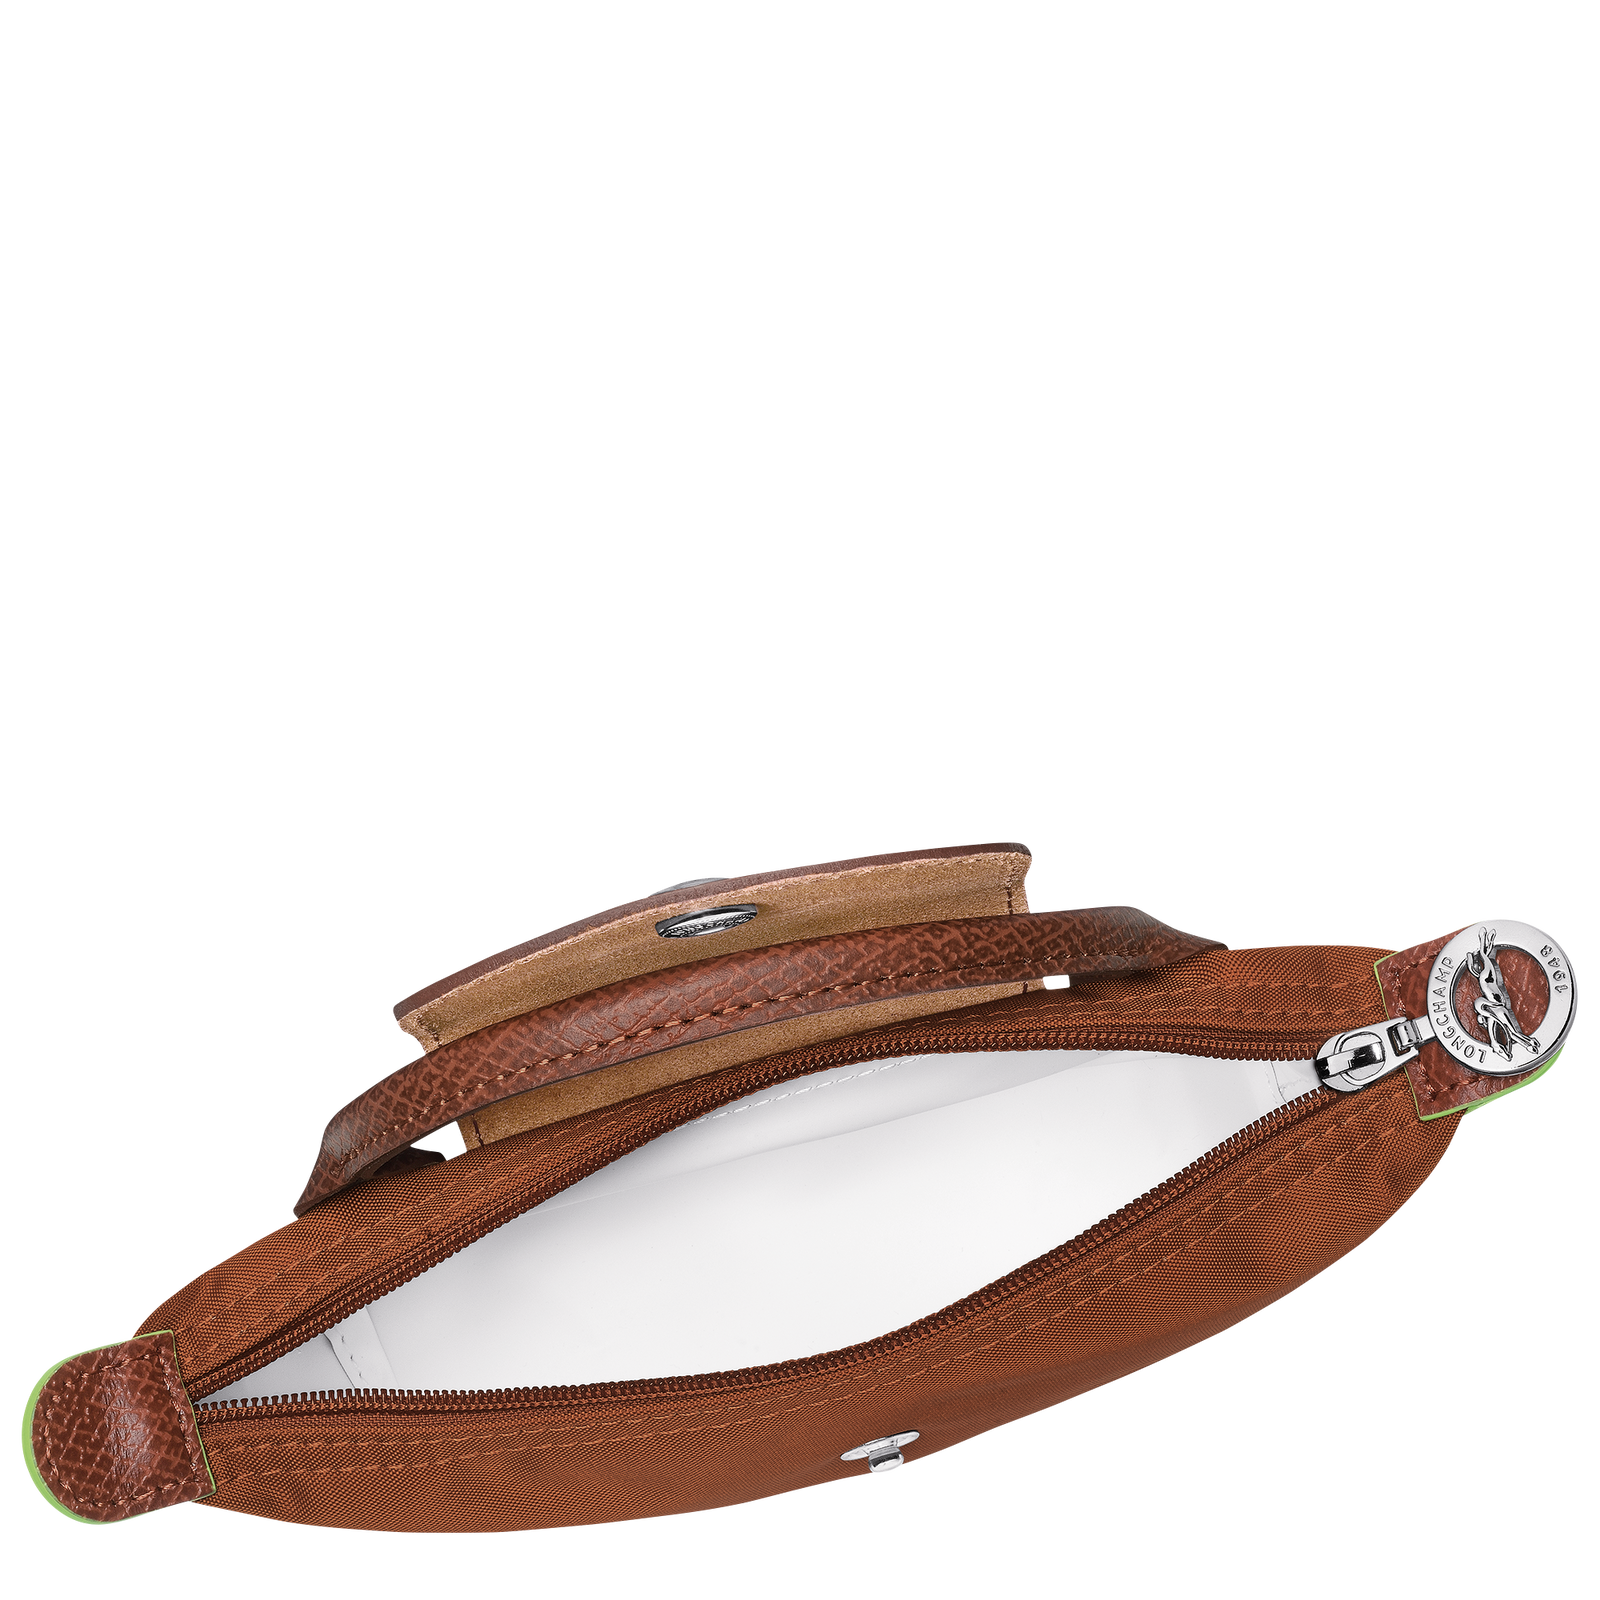 Le Pliage Green Pouch with handle, Cognac